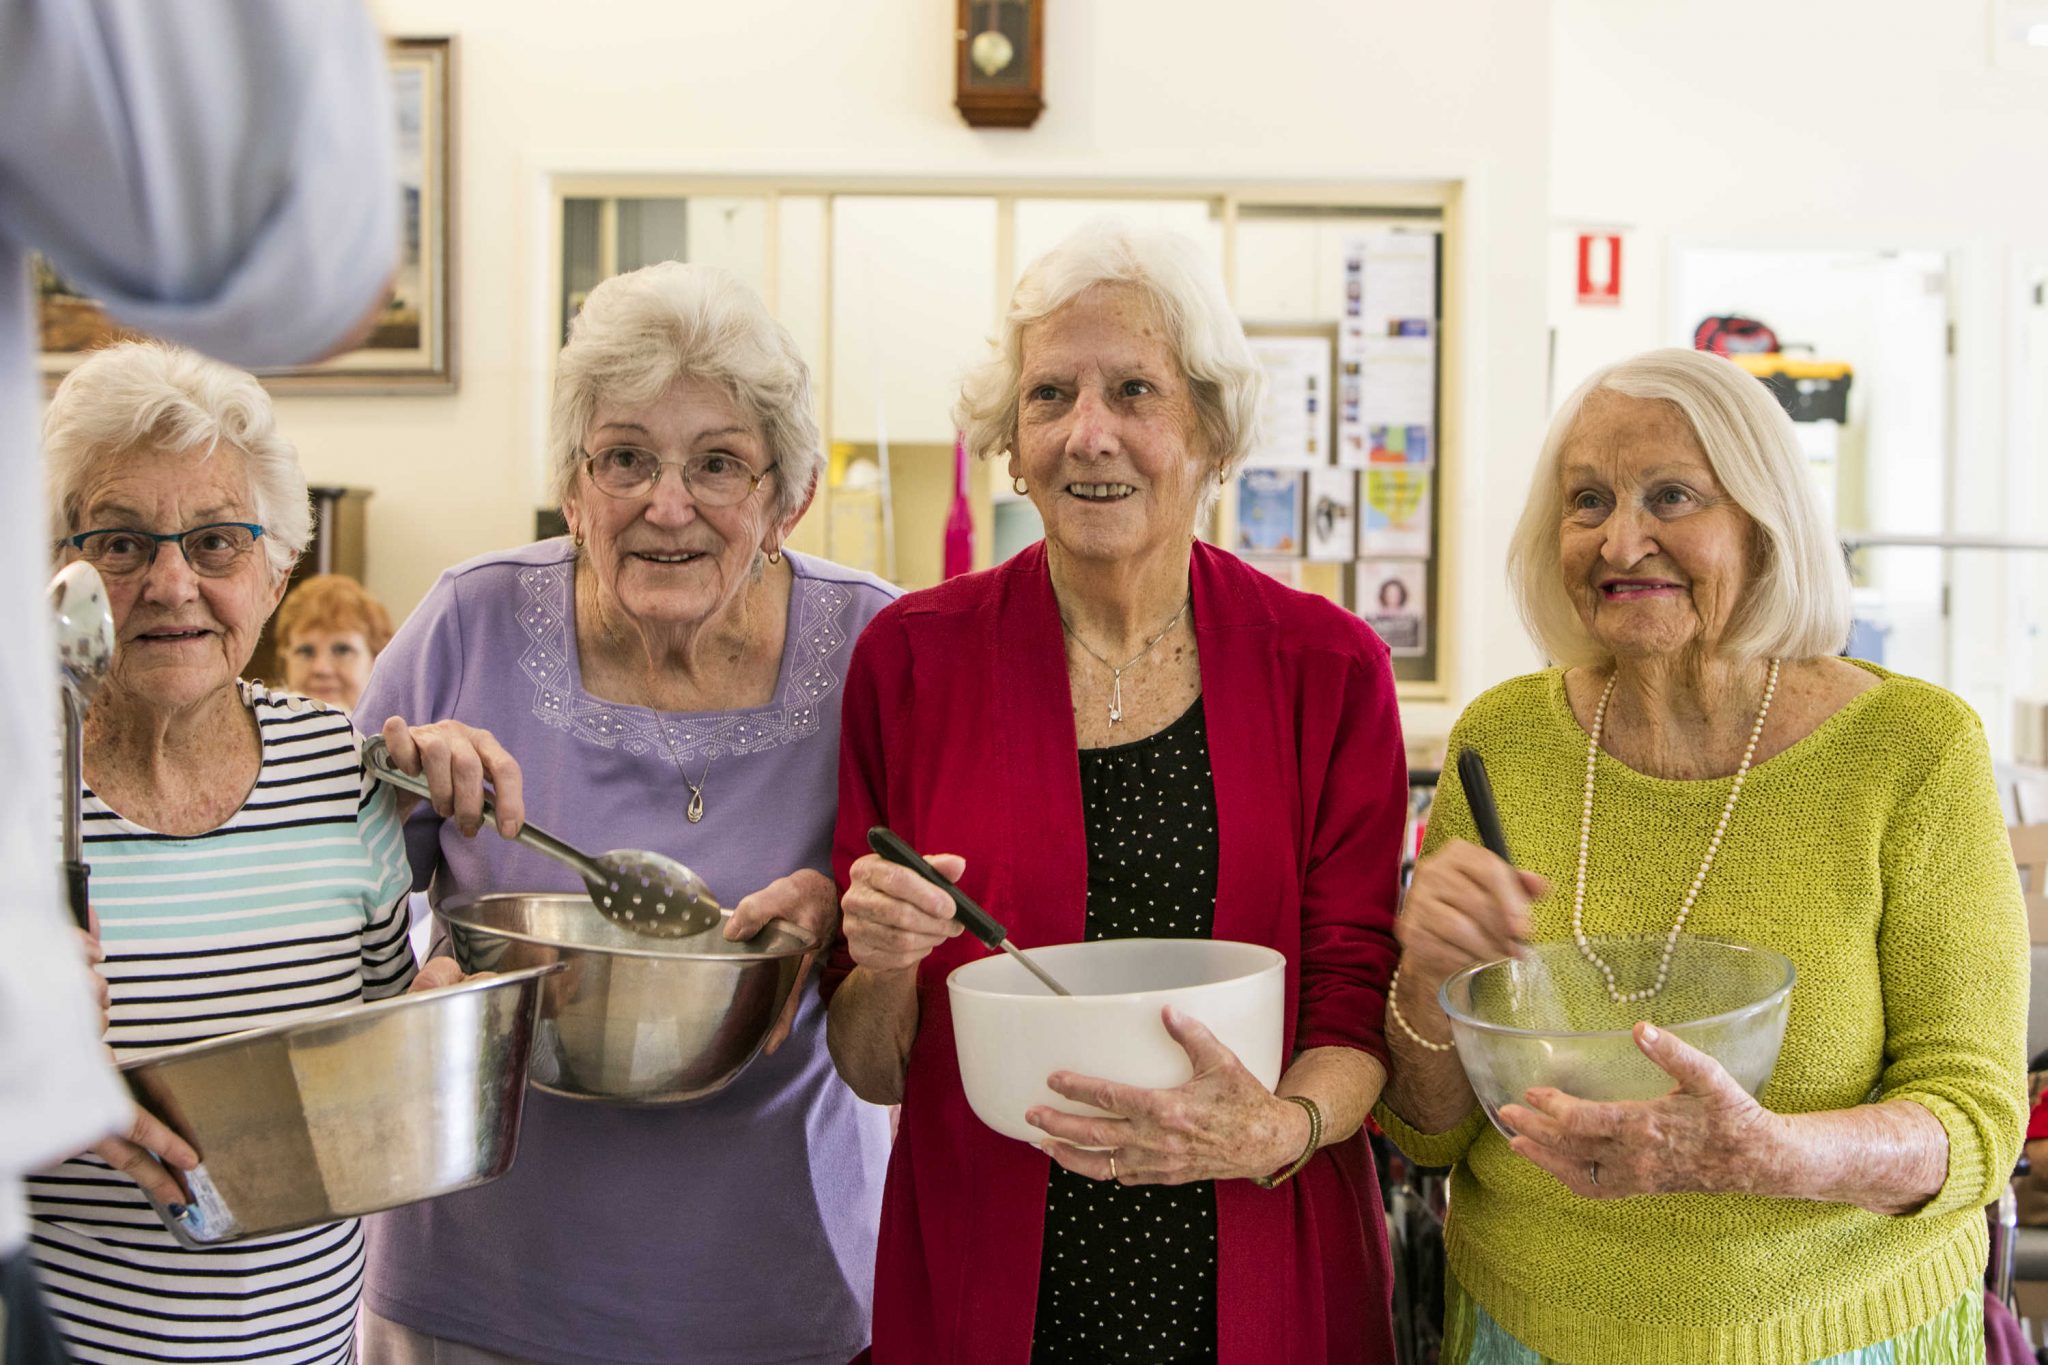 A group of residents enjoying cooking together at The Cooking Club, a creative cooking program developed by Whiddon.